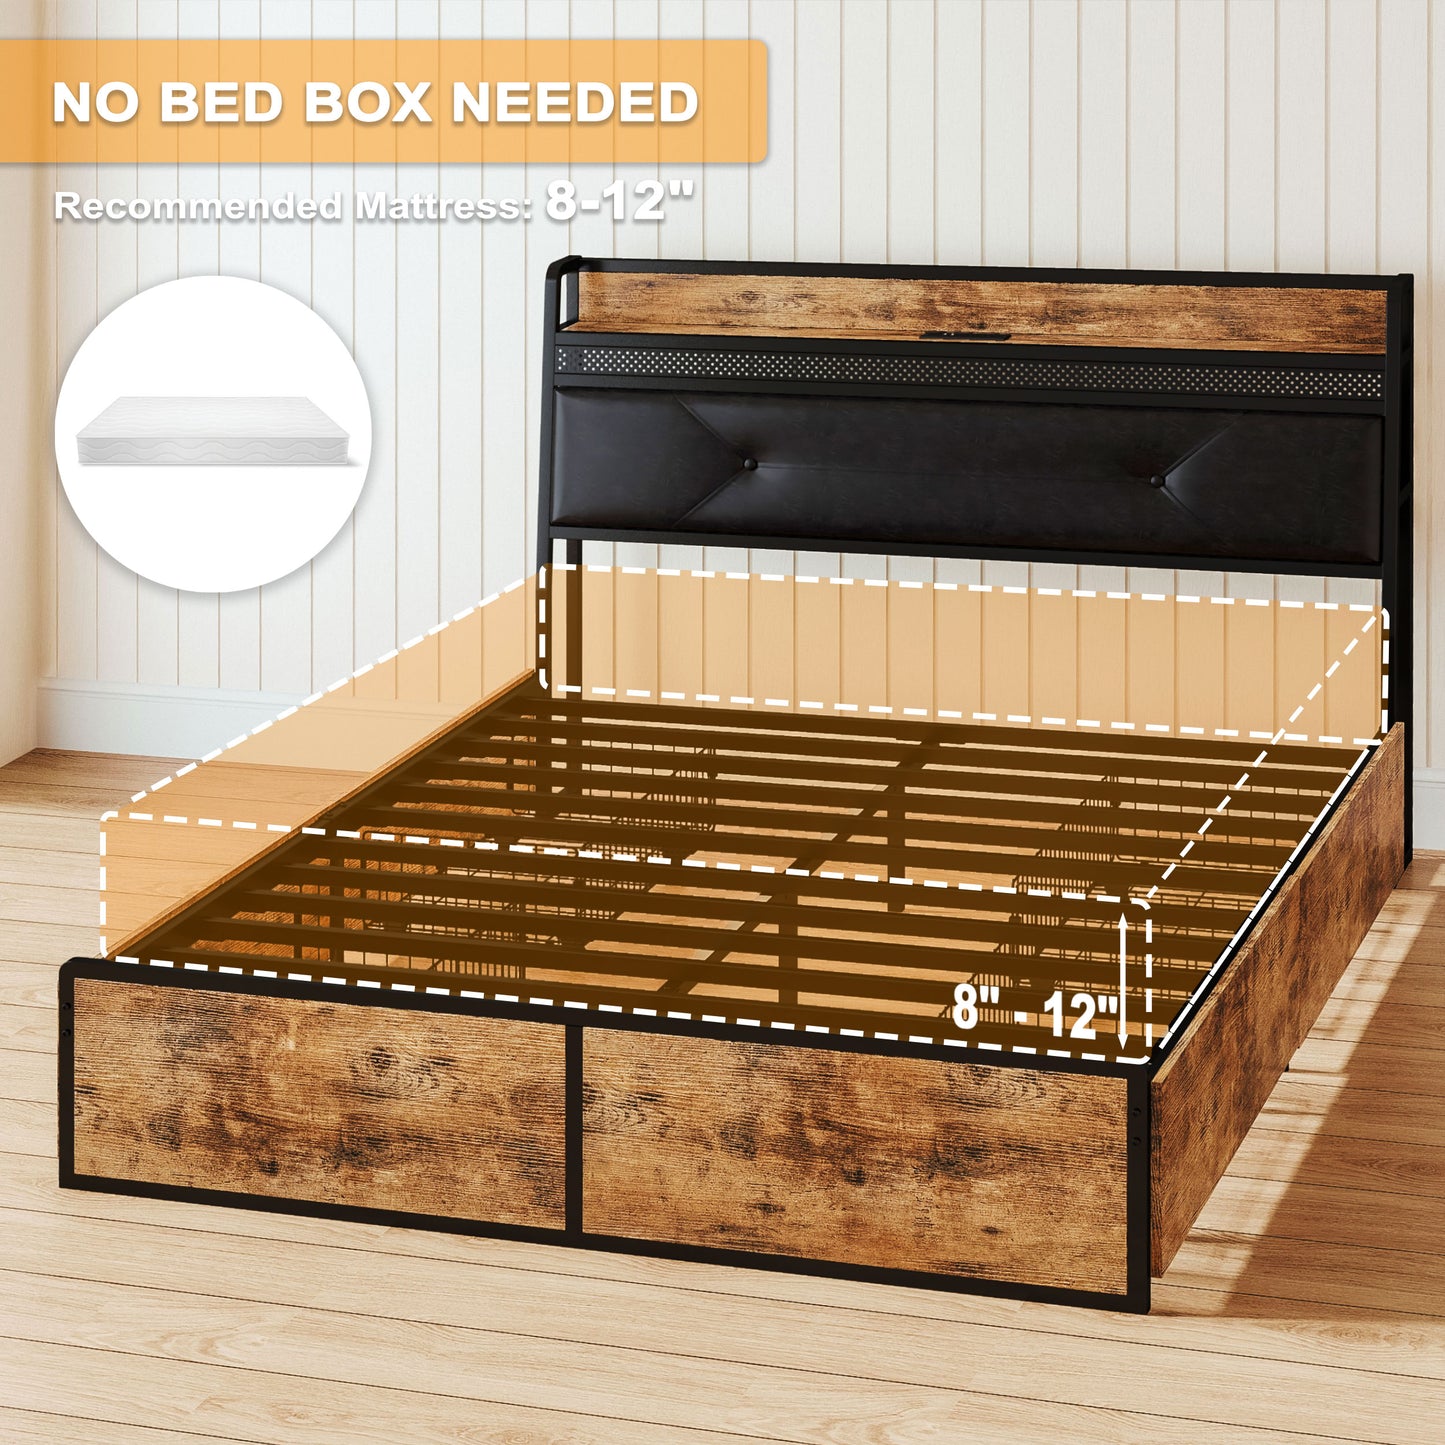 IRONCK LED Bed Frame with 4 Drawers